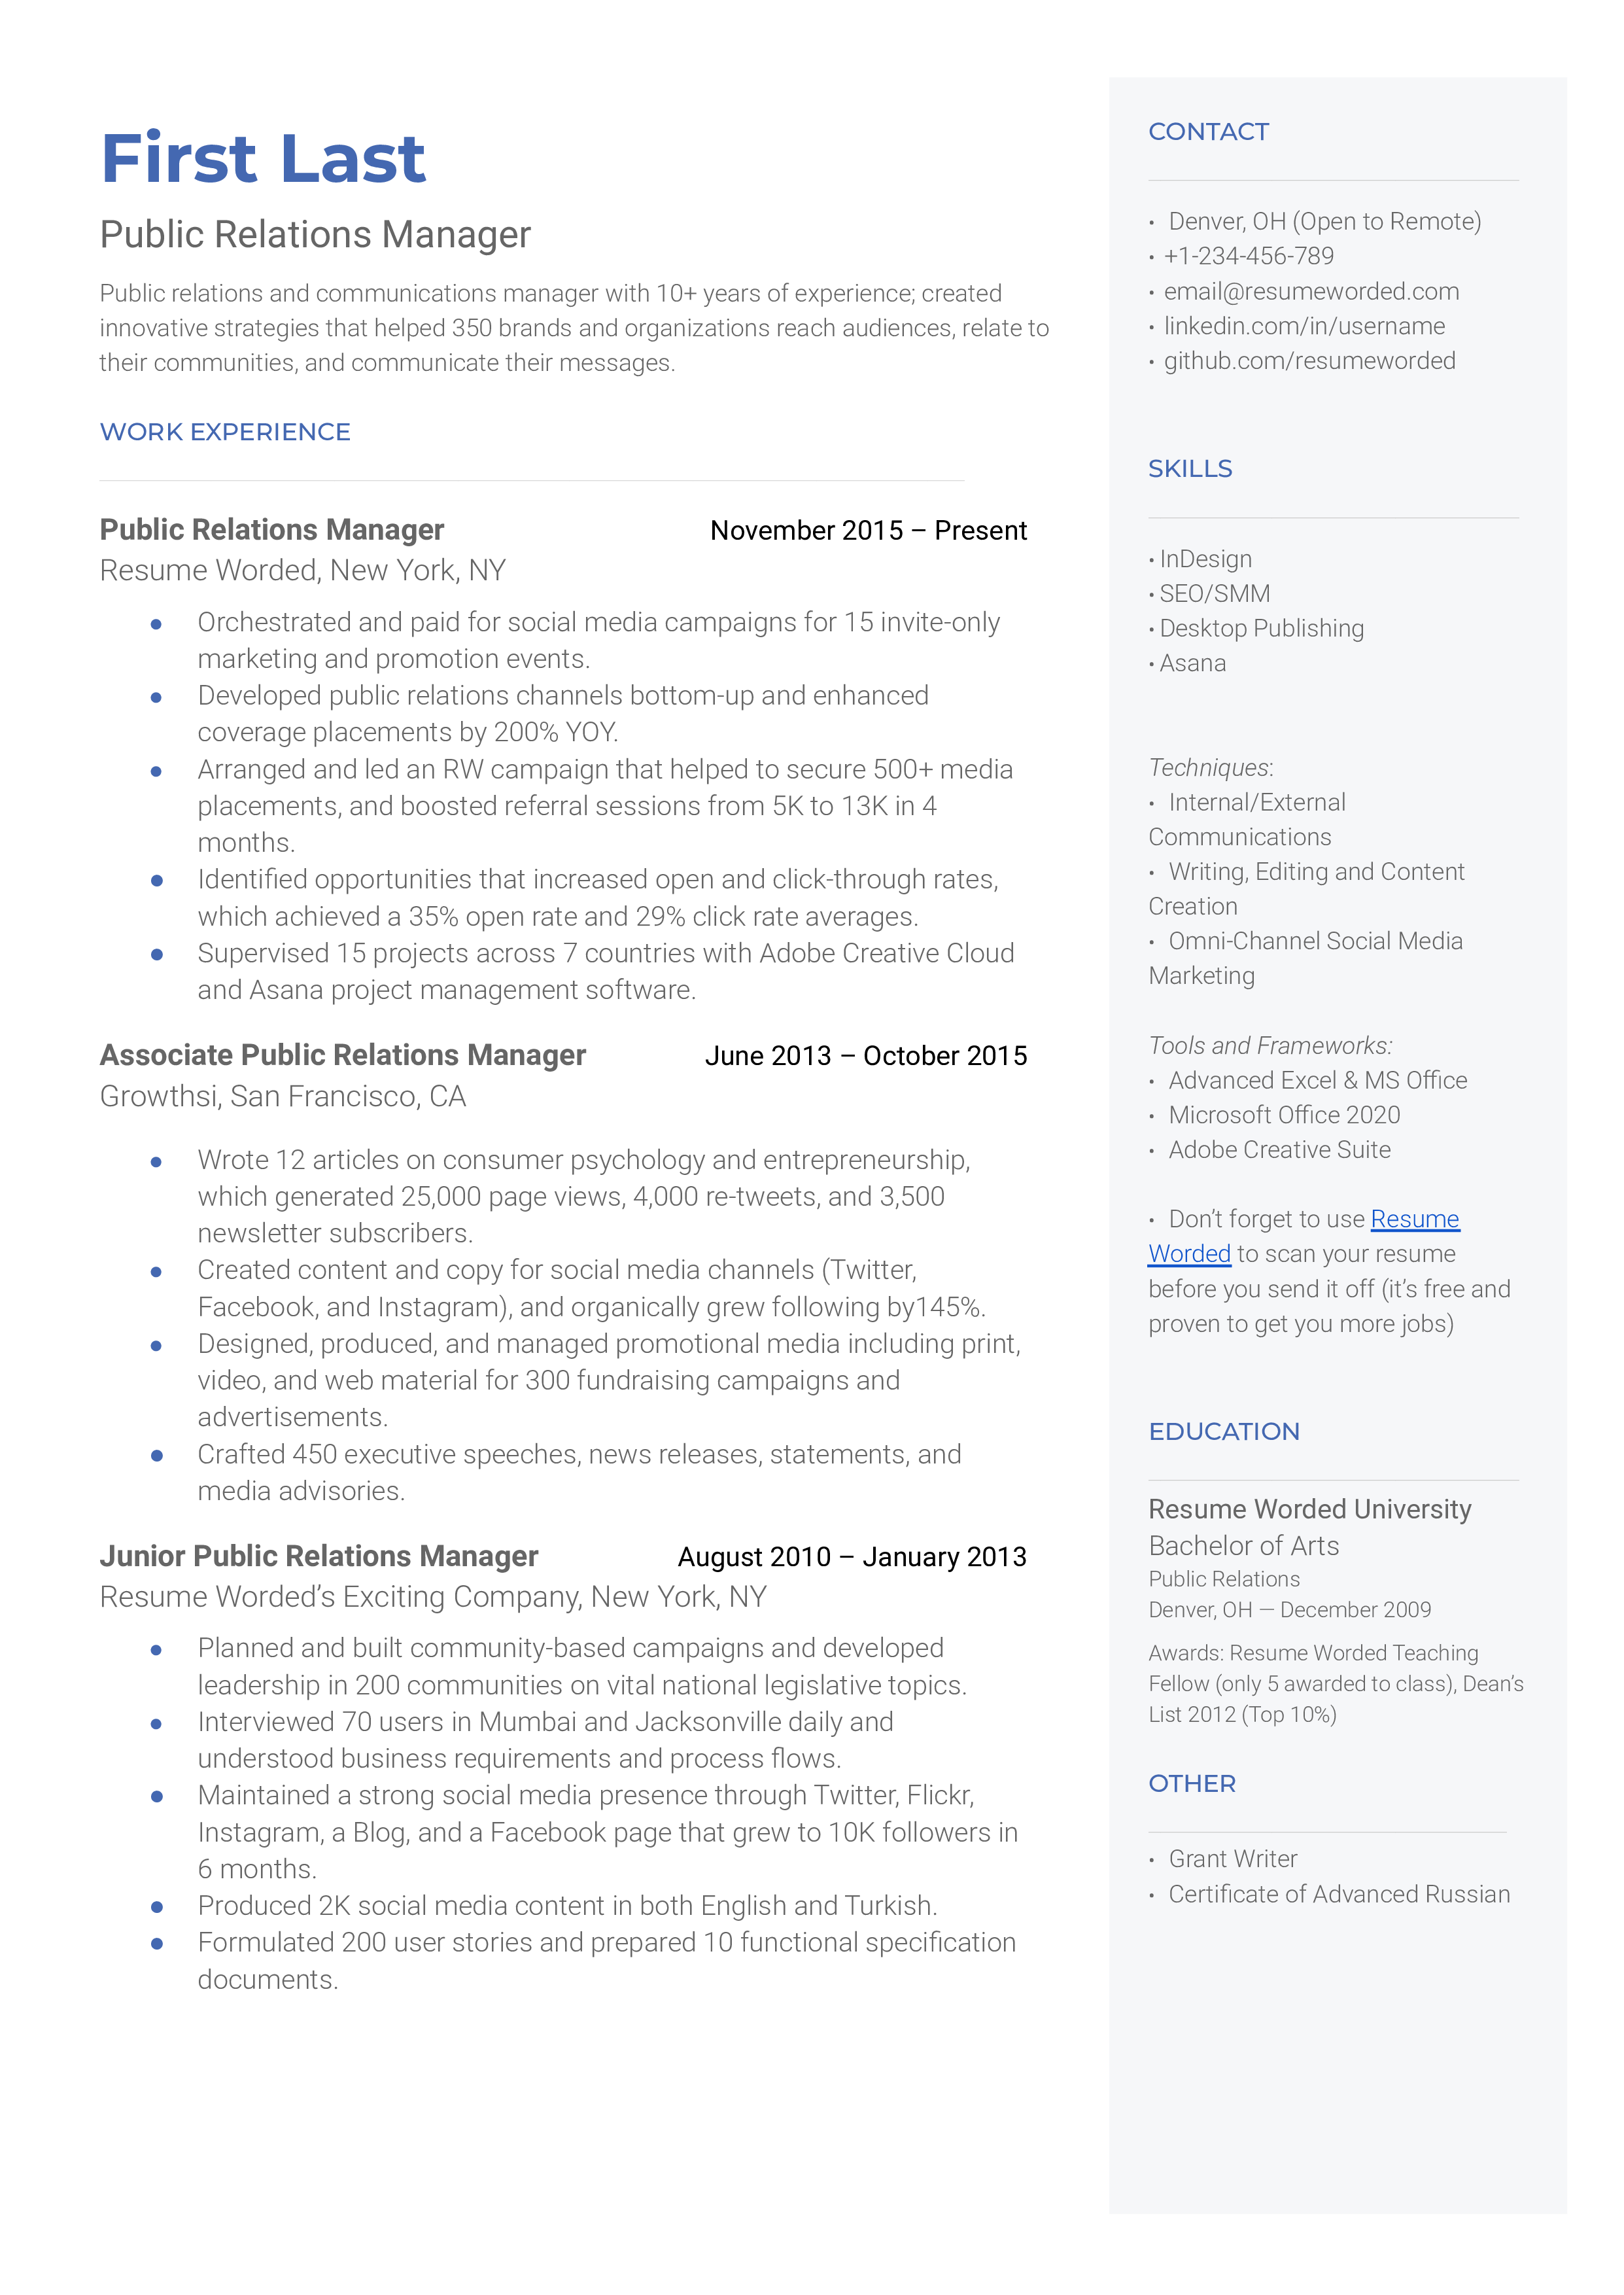 Public Relations Manager Resume Template + Example